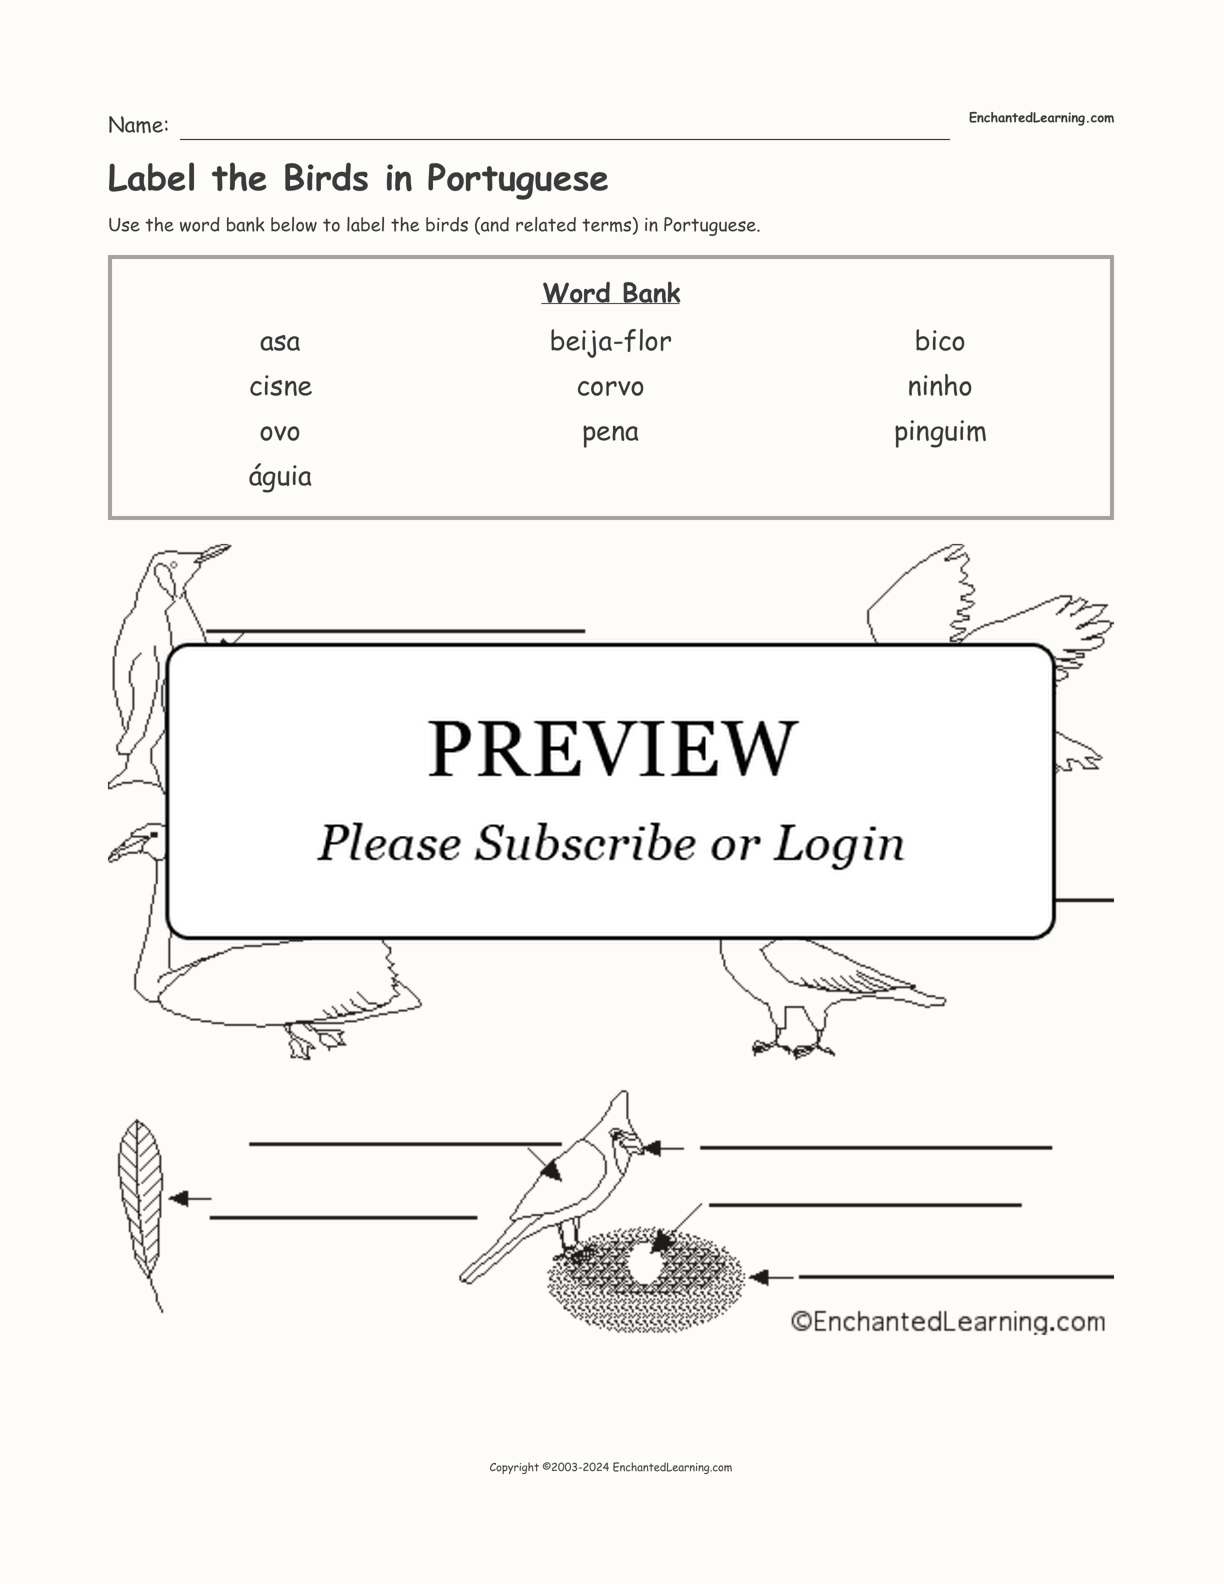 Label the Birds in Portuguese interactive worksheet page 1